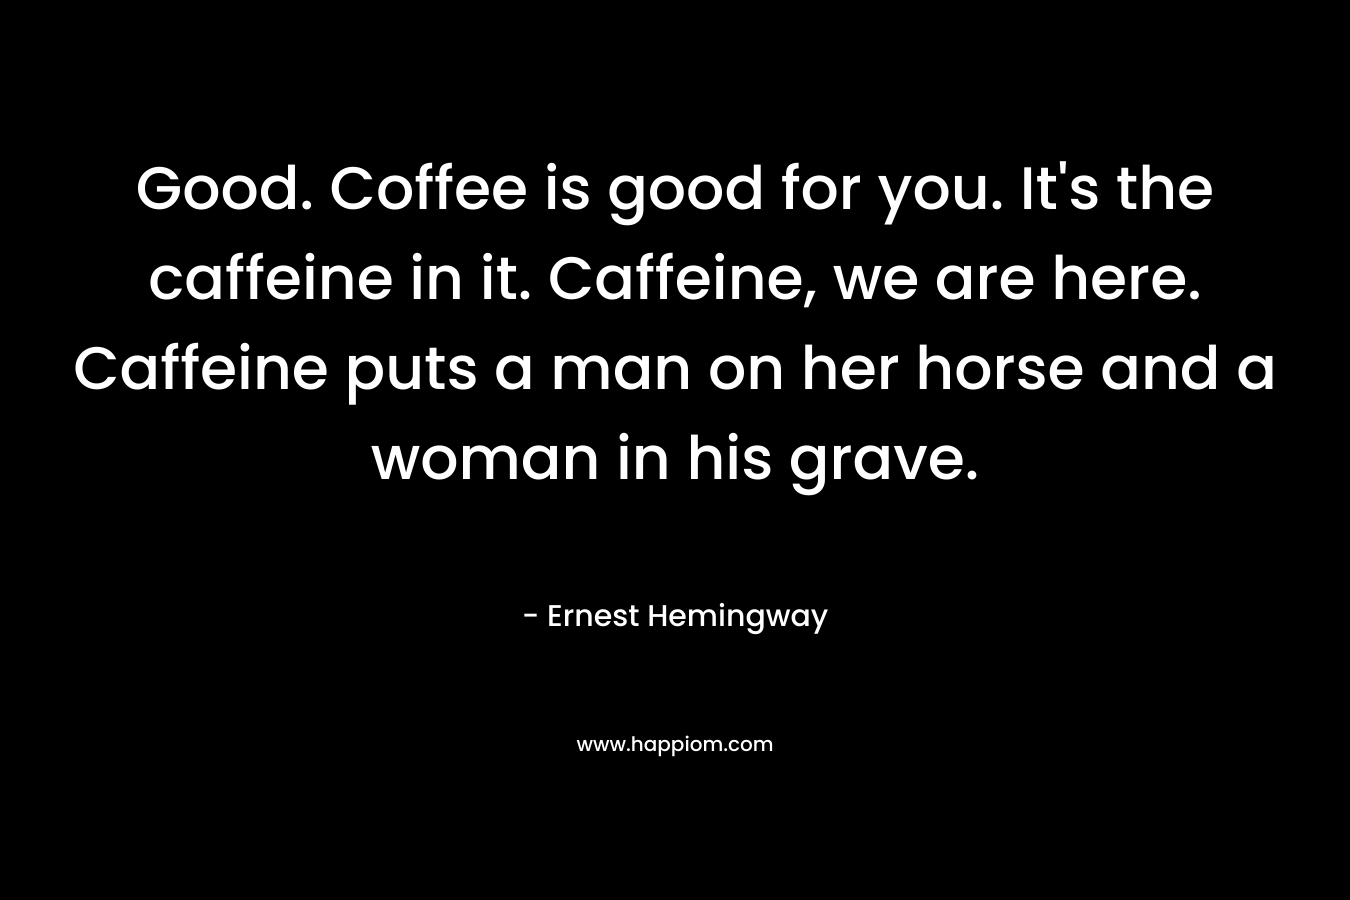 Good. Coffee is good for you. It’s the caffeine in it. Caffeine, we are here. Caffeine puts a man on her horse and a woman in his grave. – Ernest Hemingway